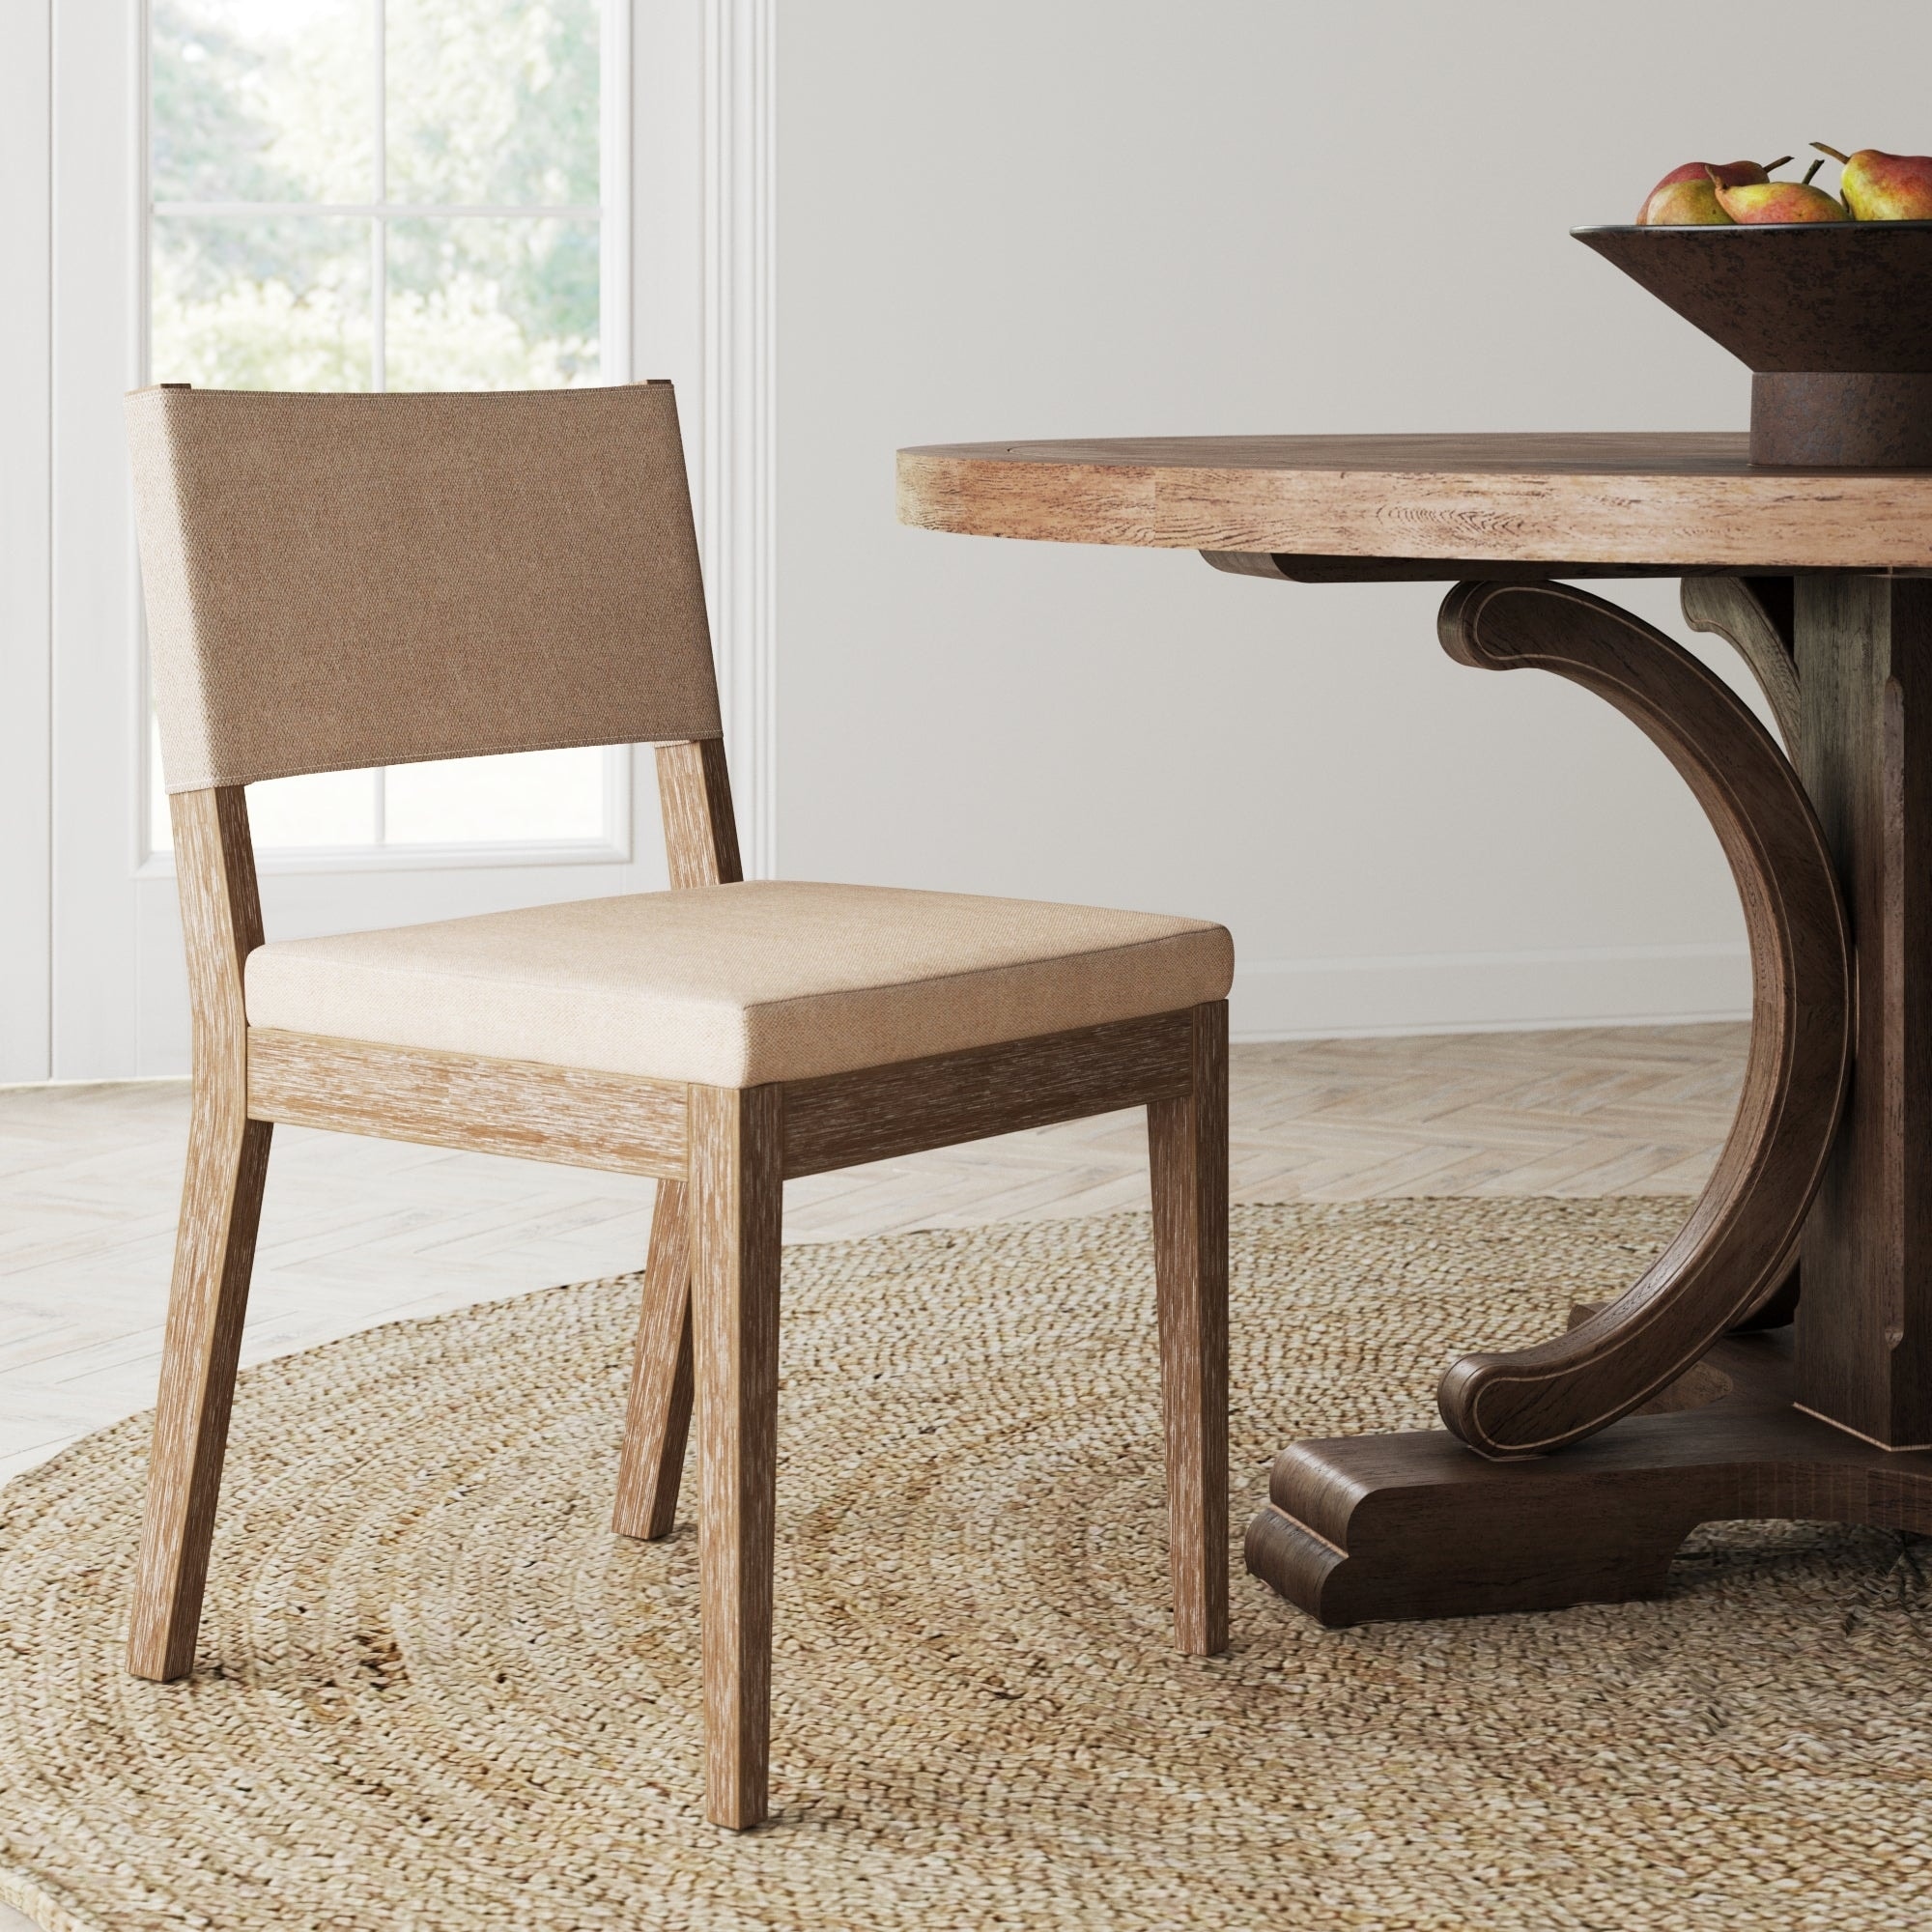 Linus Modern Upholstered Dining Chair, Solid Rubberwood Legs